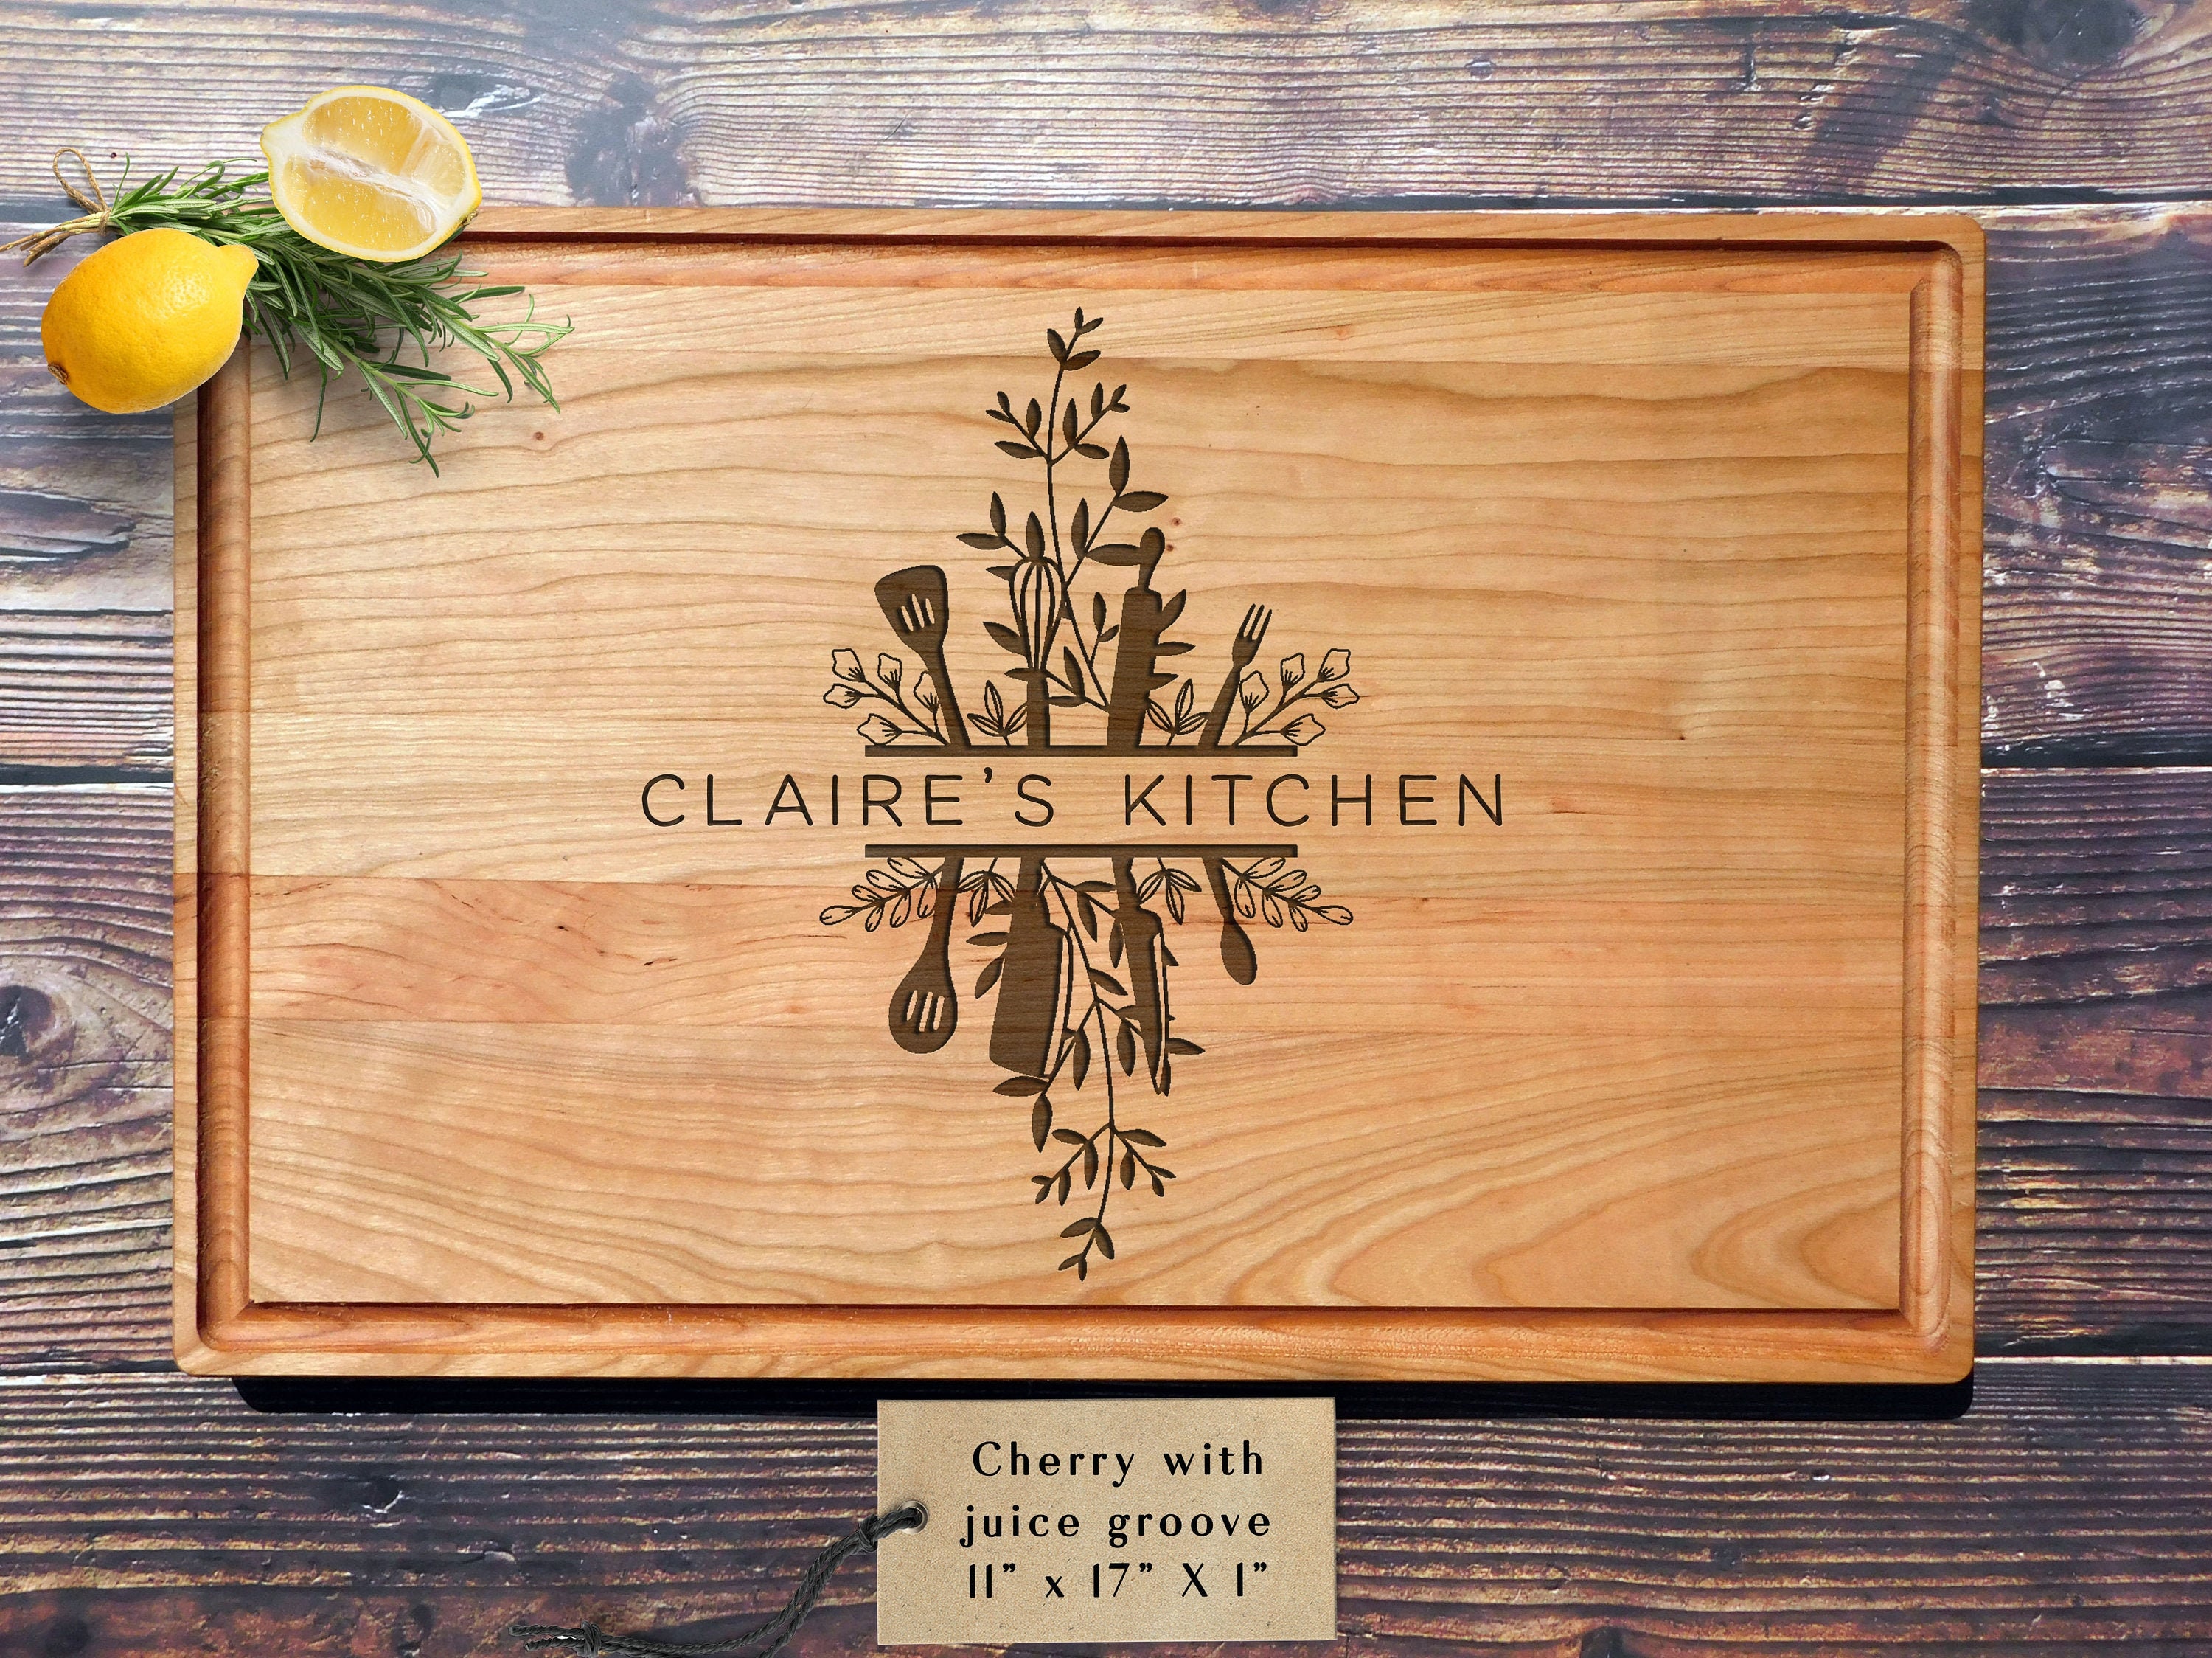 993 Personalized Engraved Cutting Board with Recipe design for Anniversary or Birthday Gift